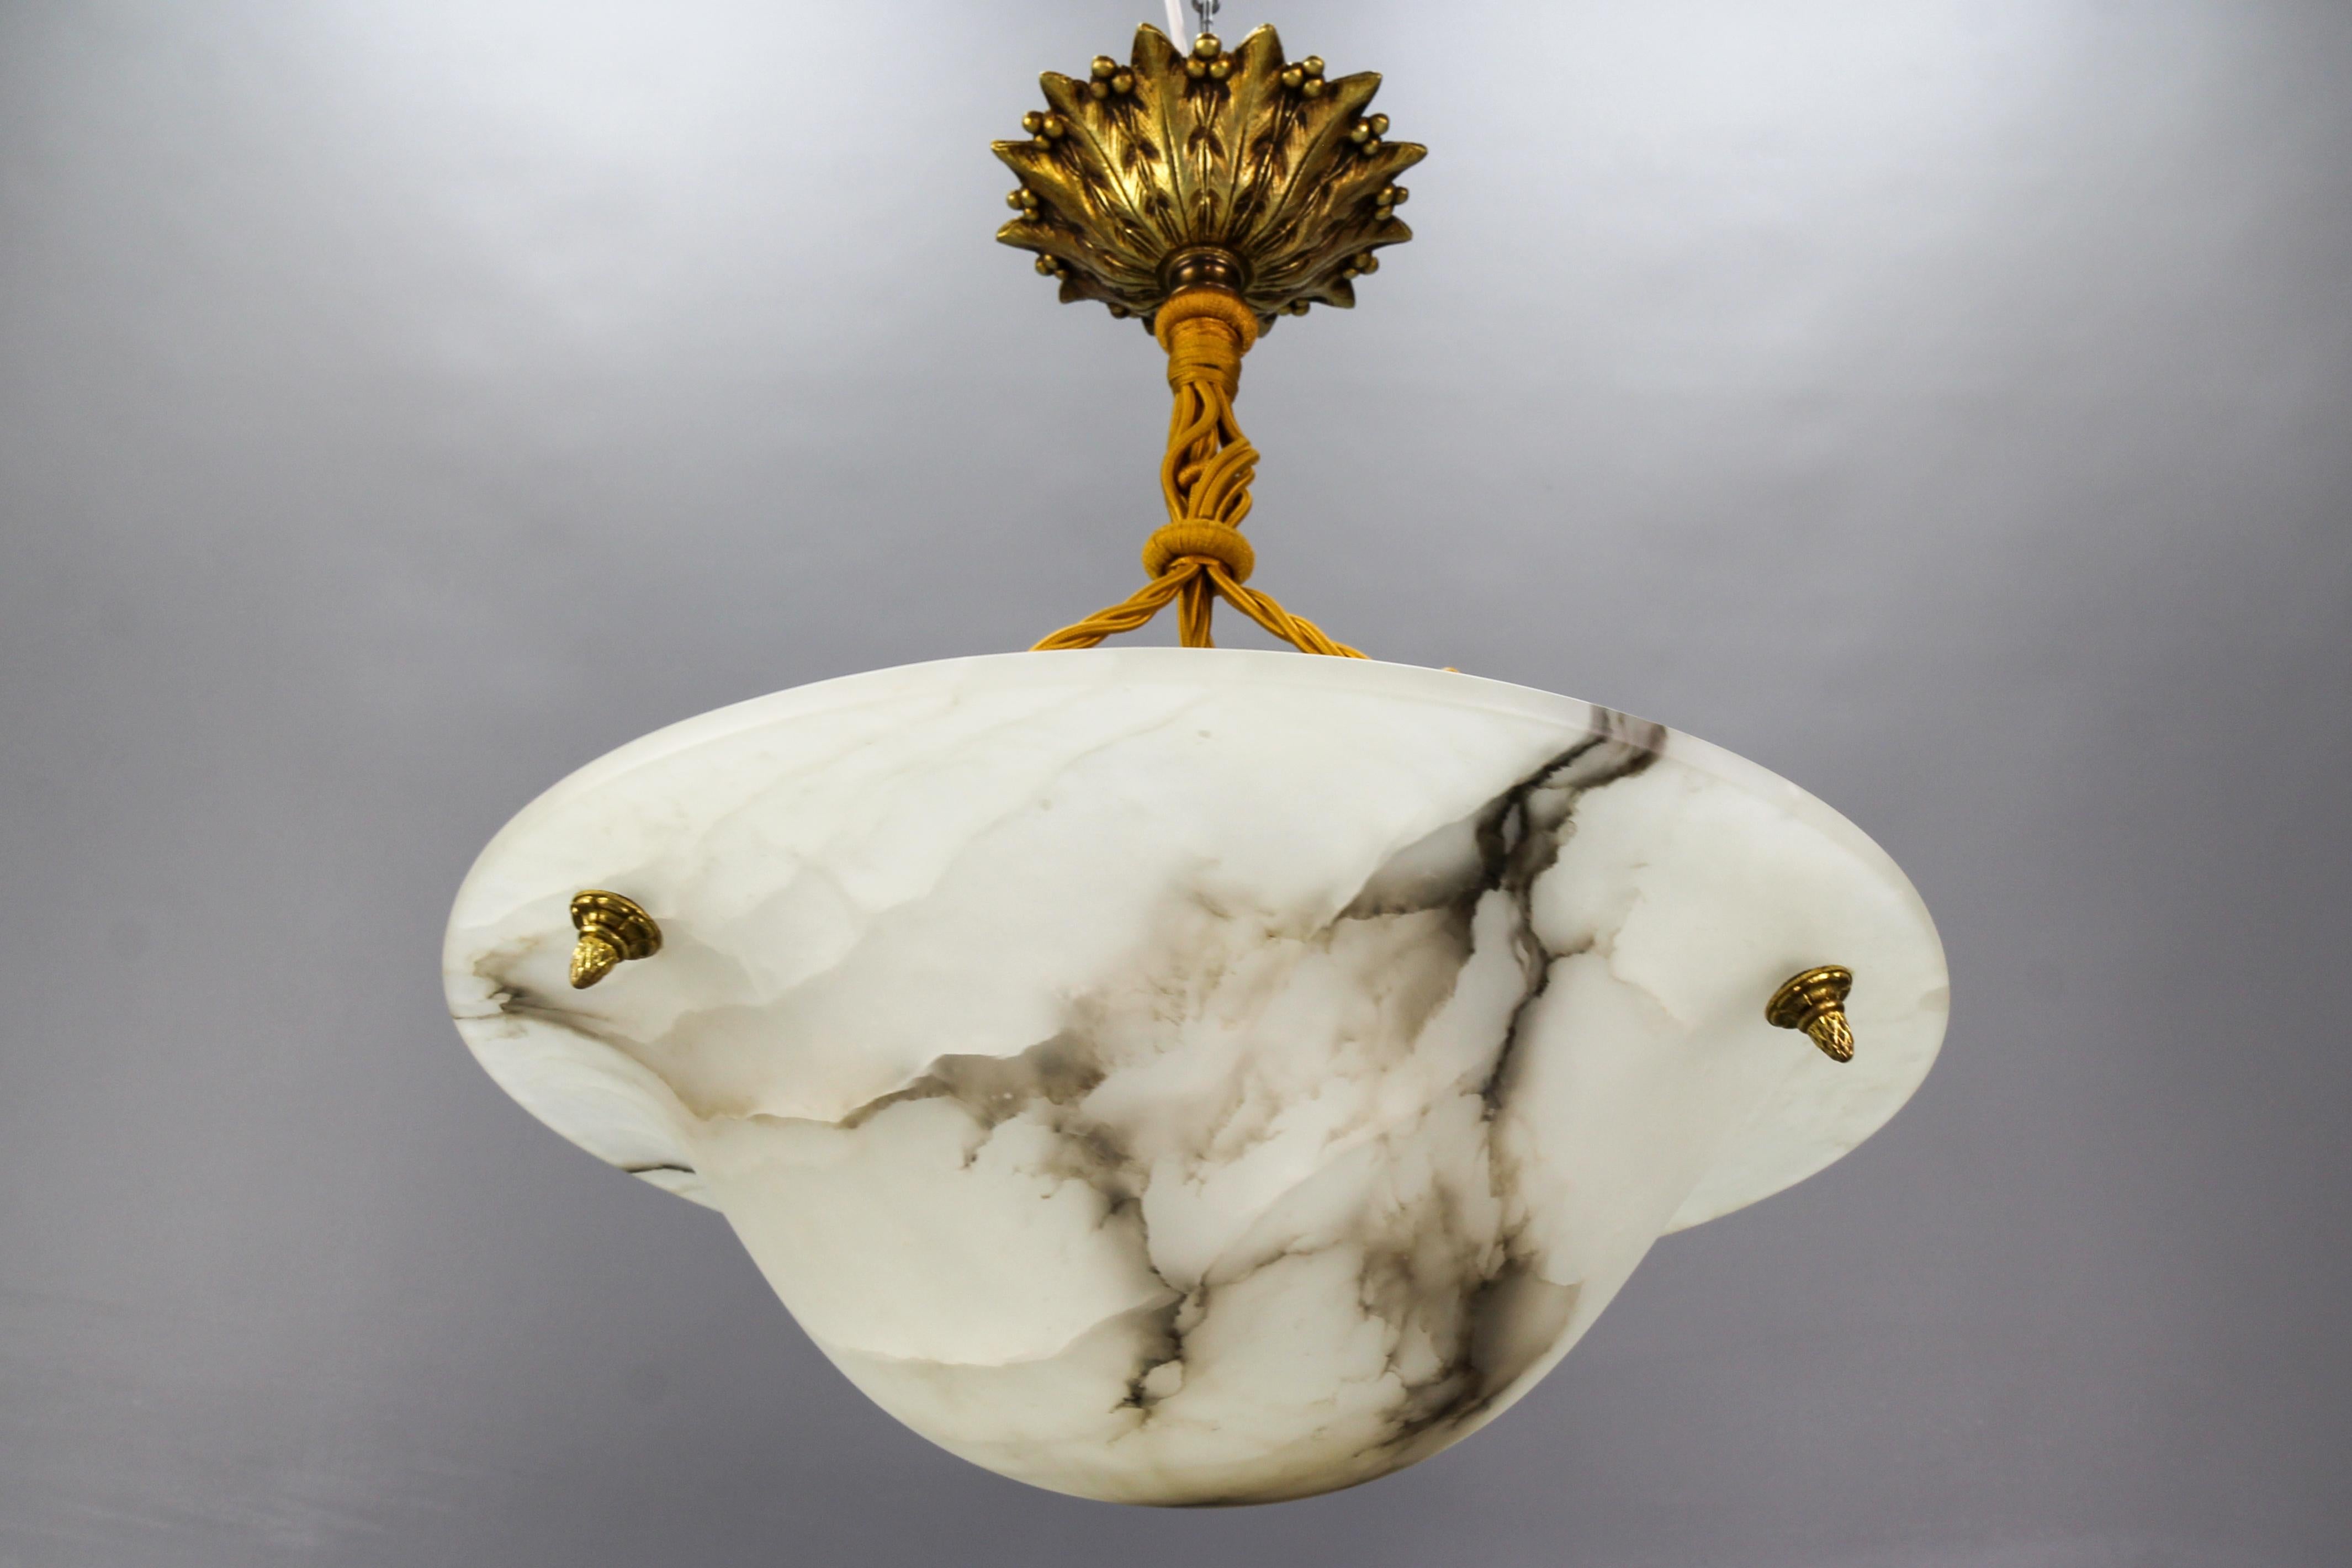 Art Deco white and black veined alabaster pendant light fixture.
A wonderful alabaster pendant ceiling light fixture from circa the 1920s. Beautifully veined and masterfully carved one-piece white alabaster bowl suspended by three ropes (wires) and